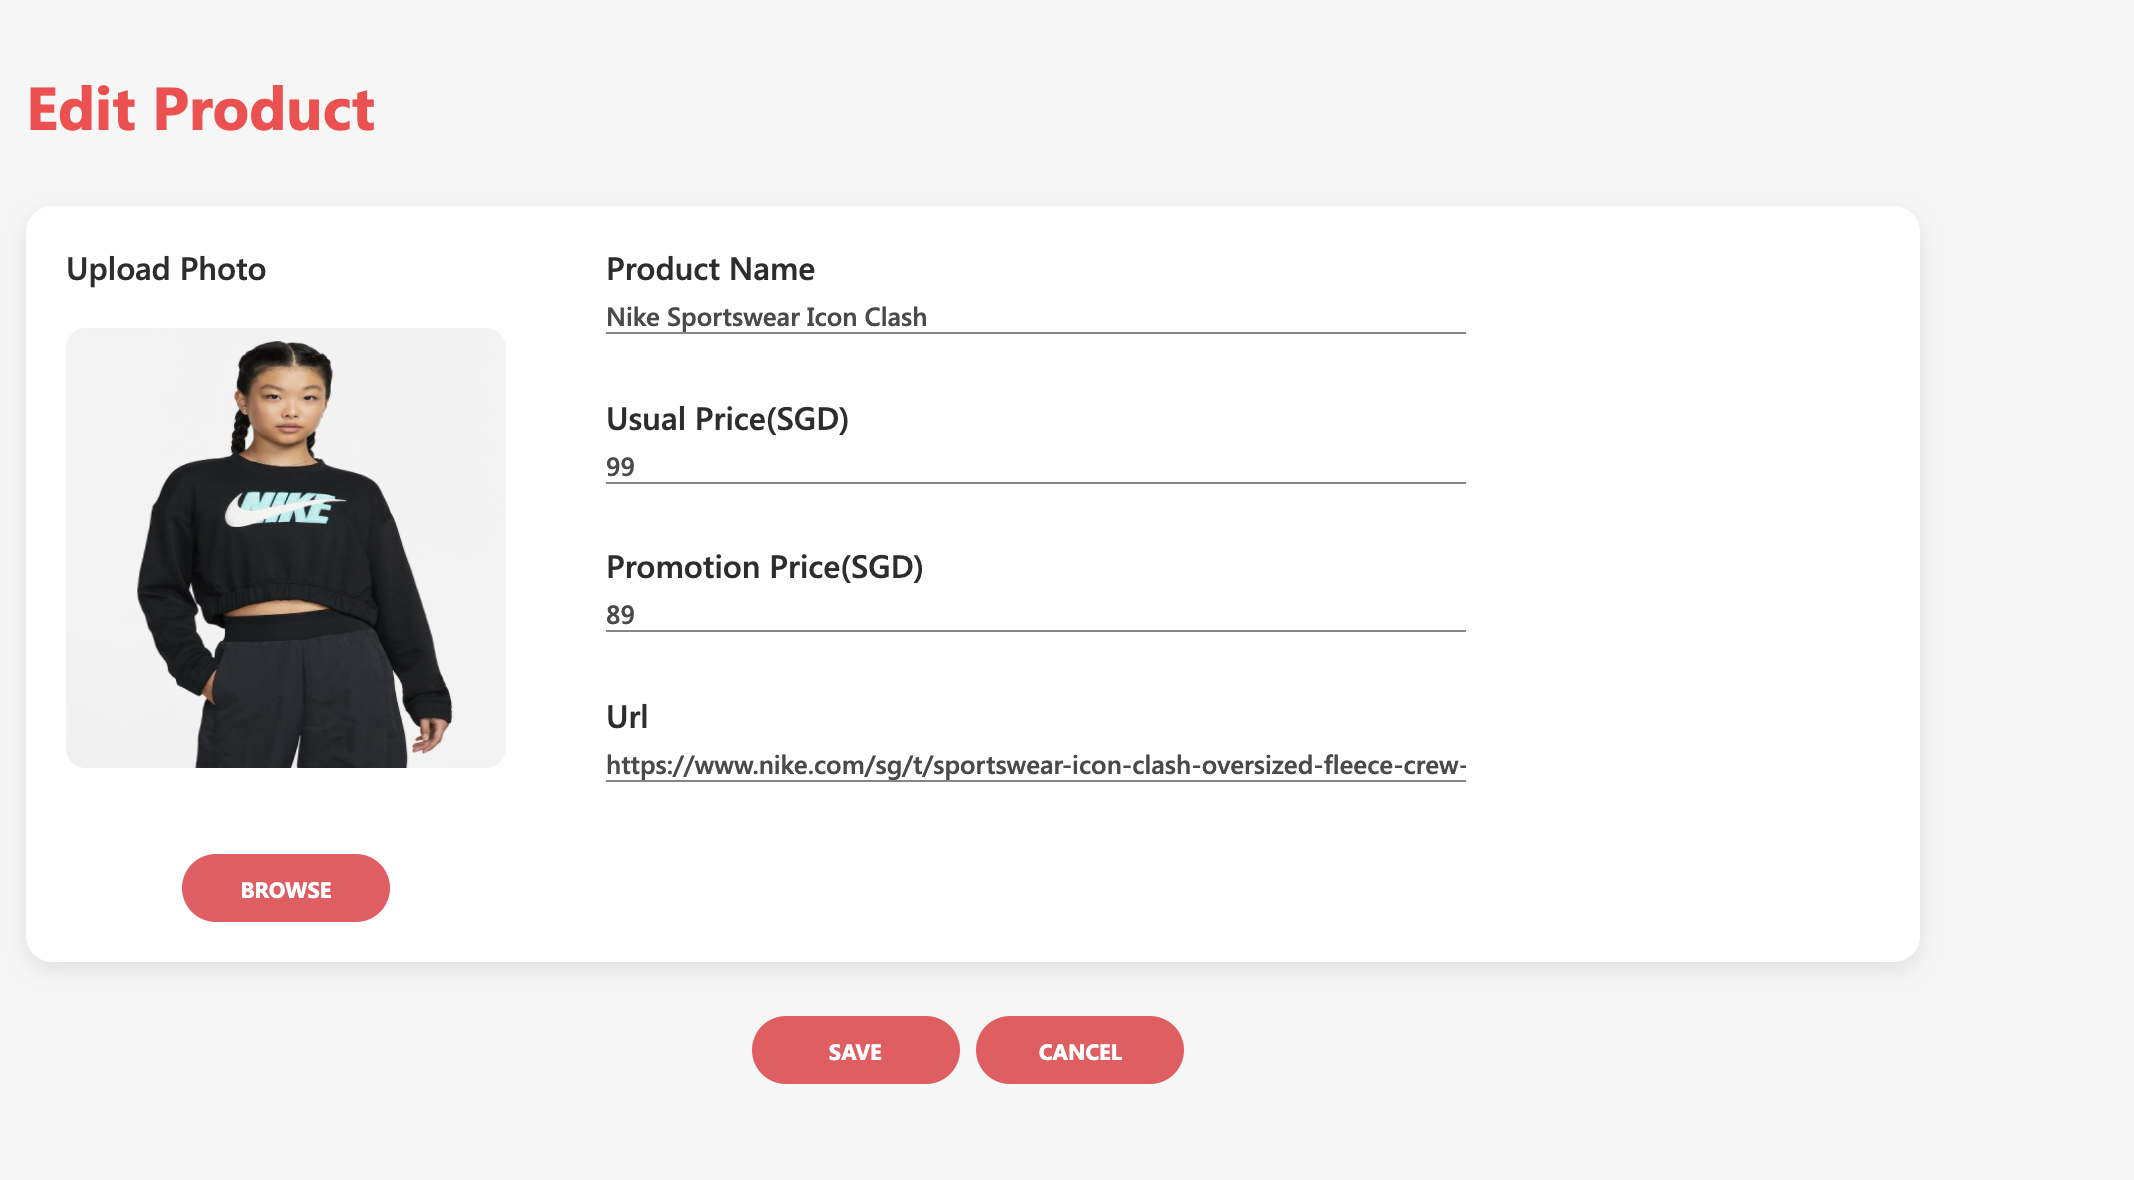 Fill in all the required information and click save. In case of no promotion price, just enter 0